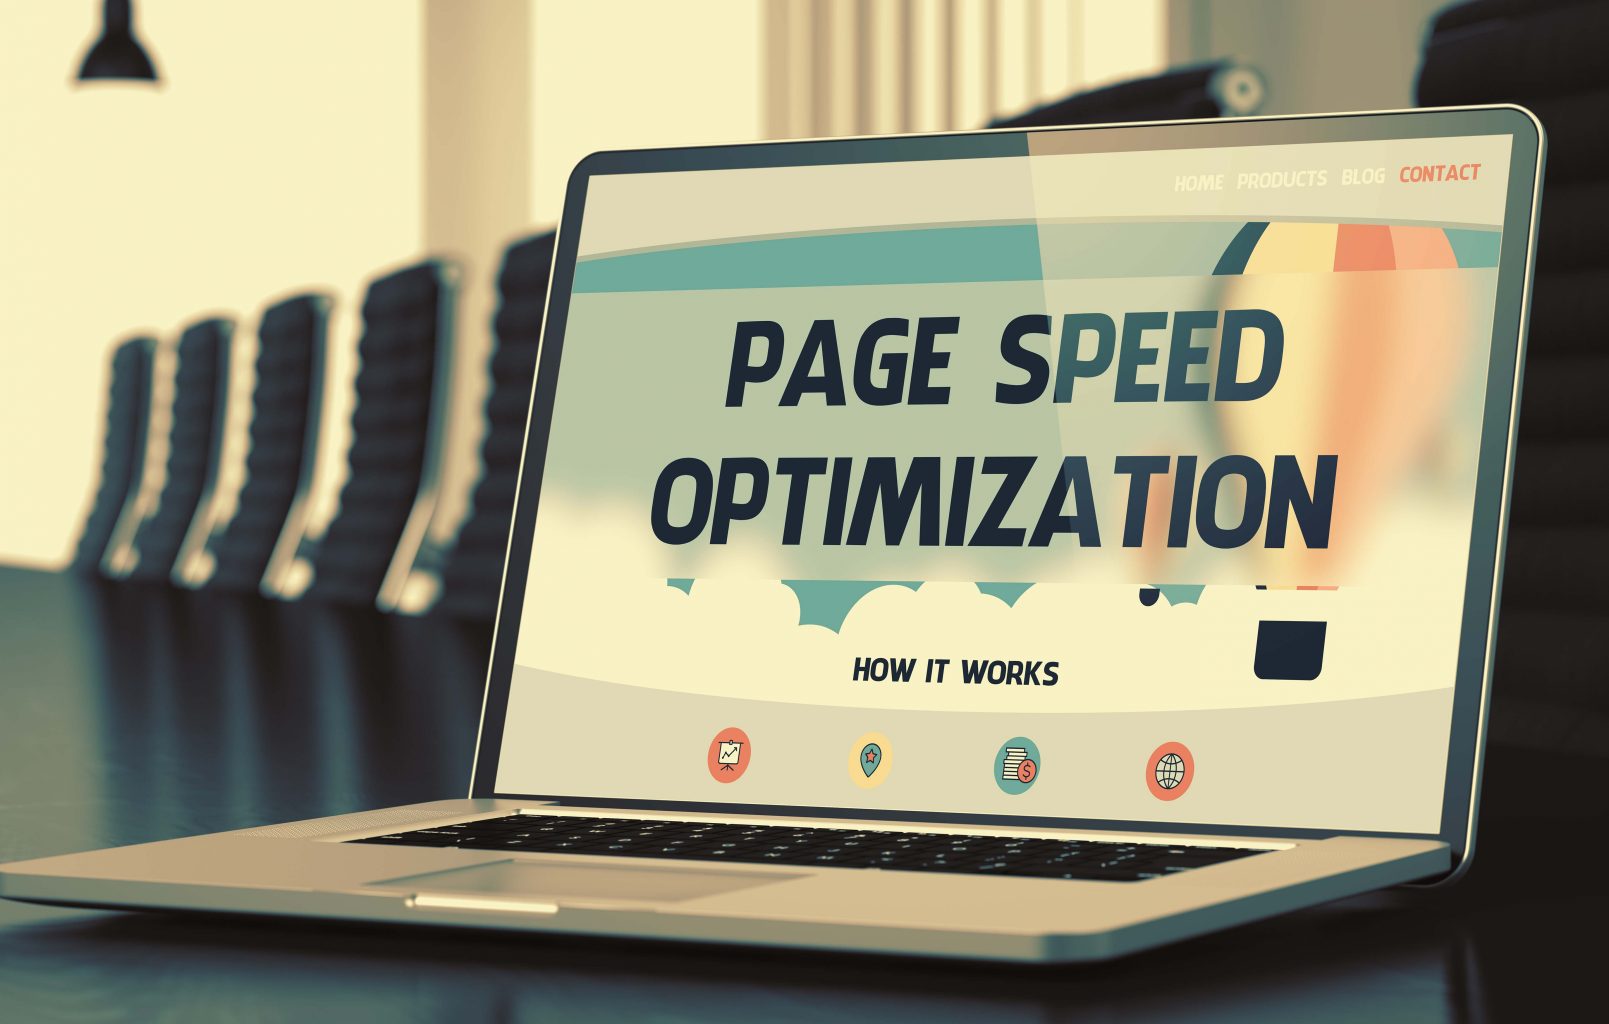 Page speed optimization reduces bounce rate, helps improve user interaction and increase conversions.